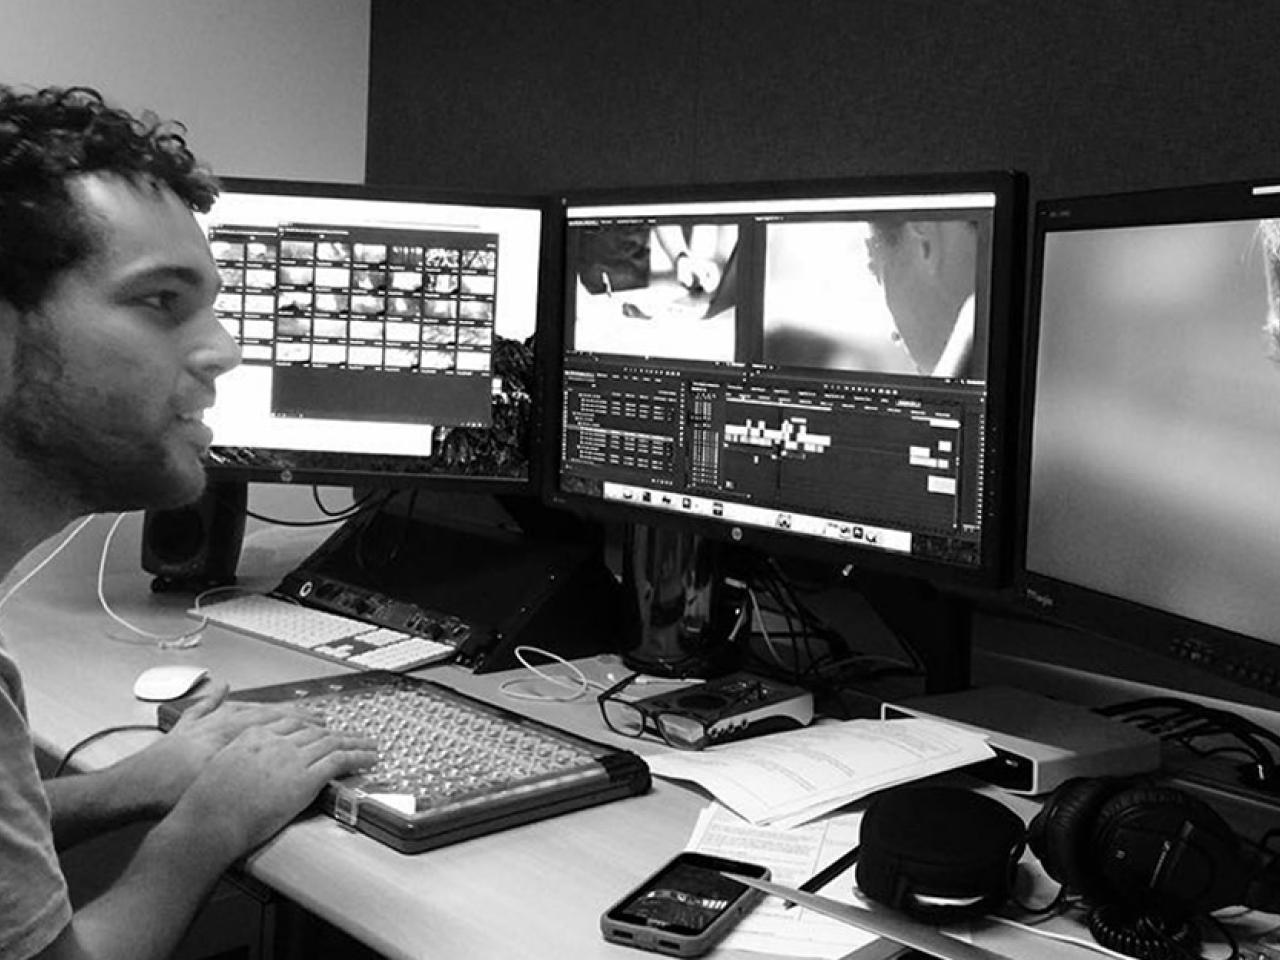 New Day Filmmaker Reid Davenport is sitting at a desk with his hands on a keyboard in a video editing room. He faces three video monitors and has a small smile on his face.